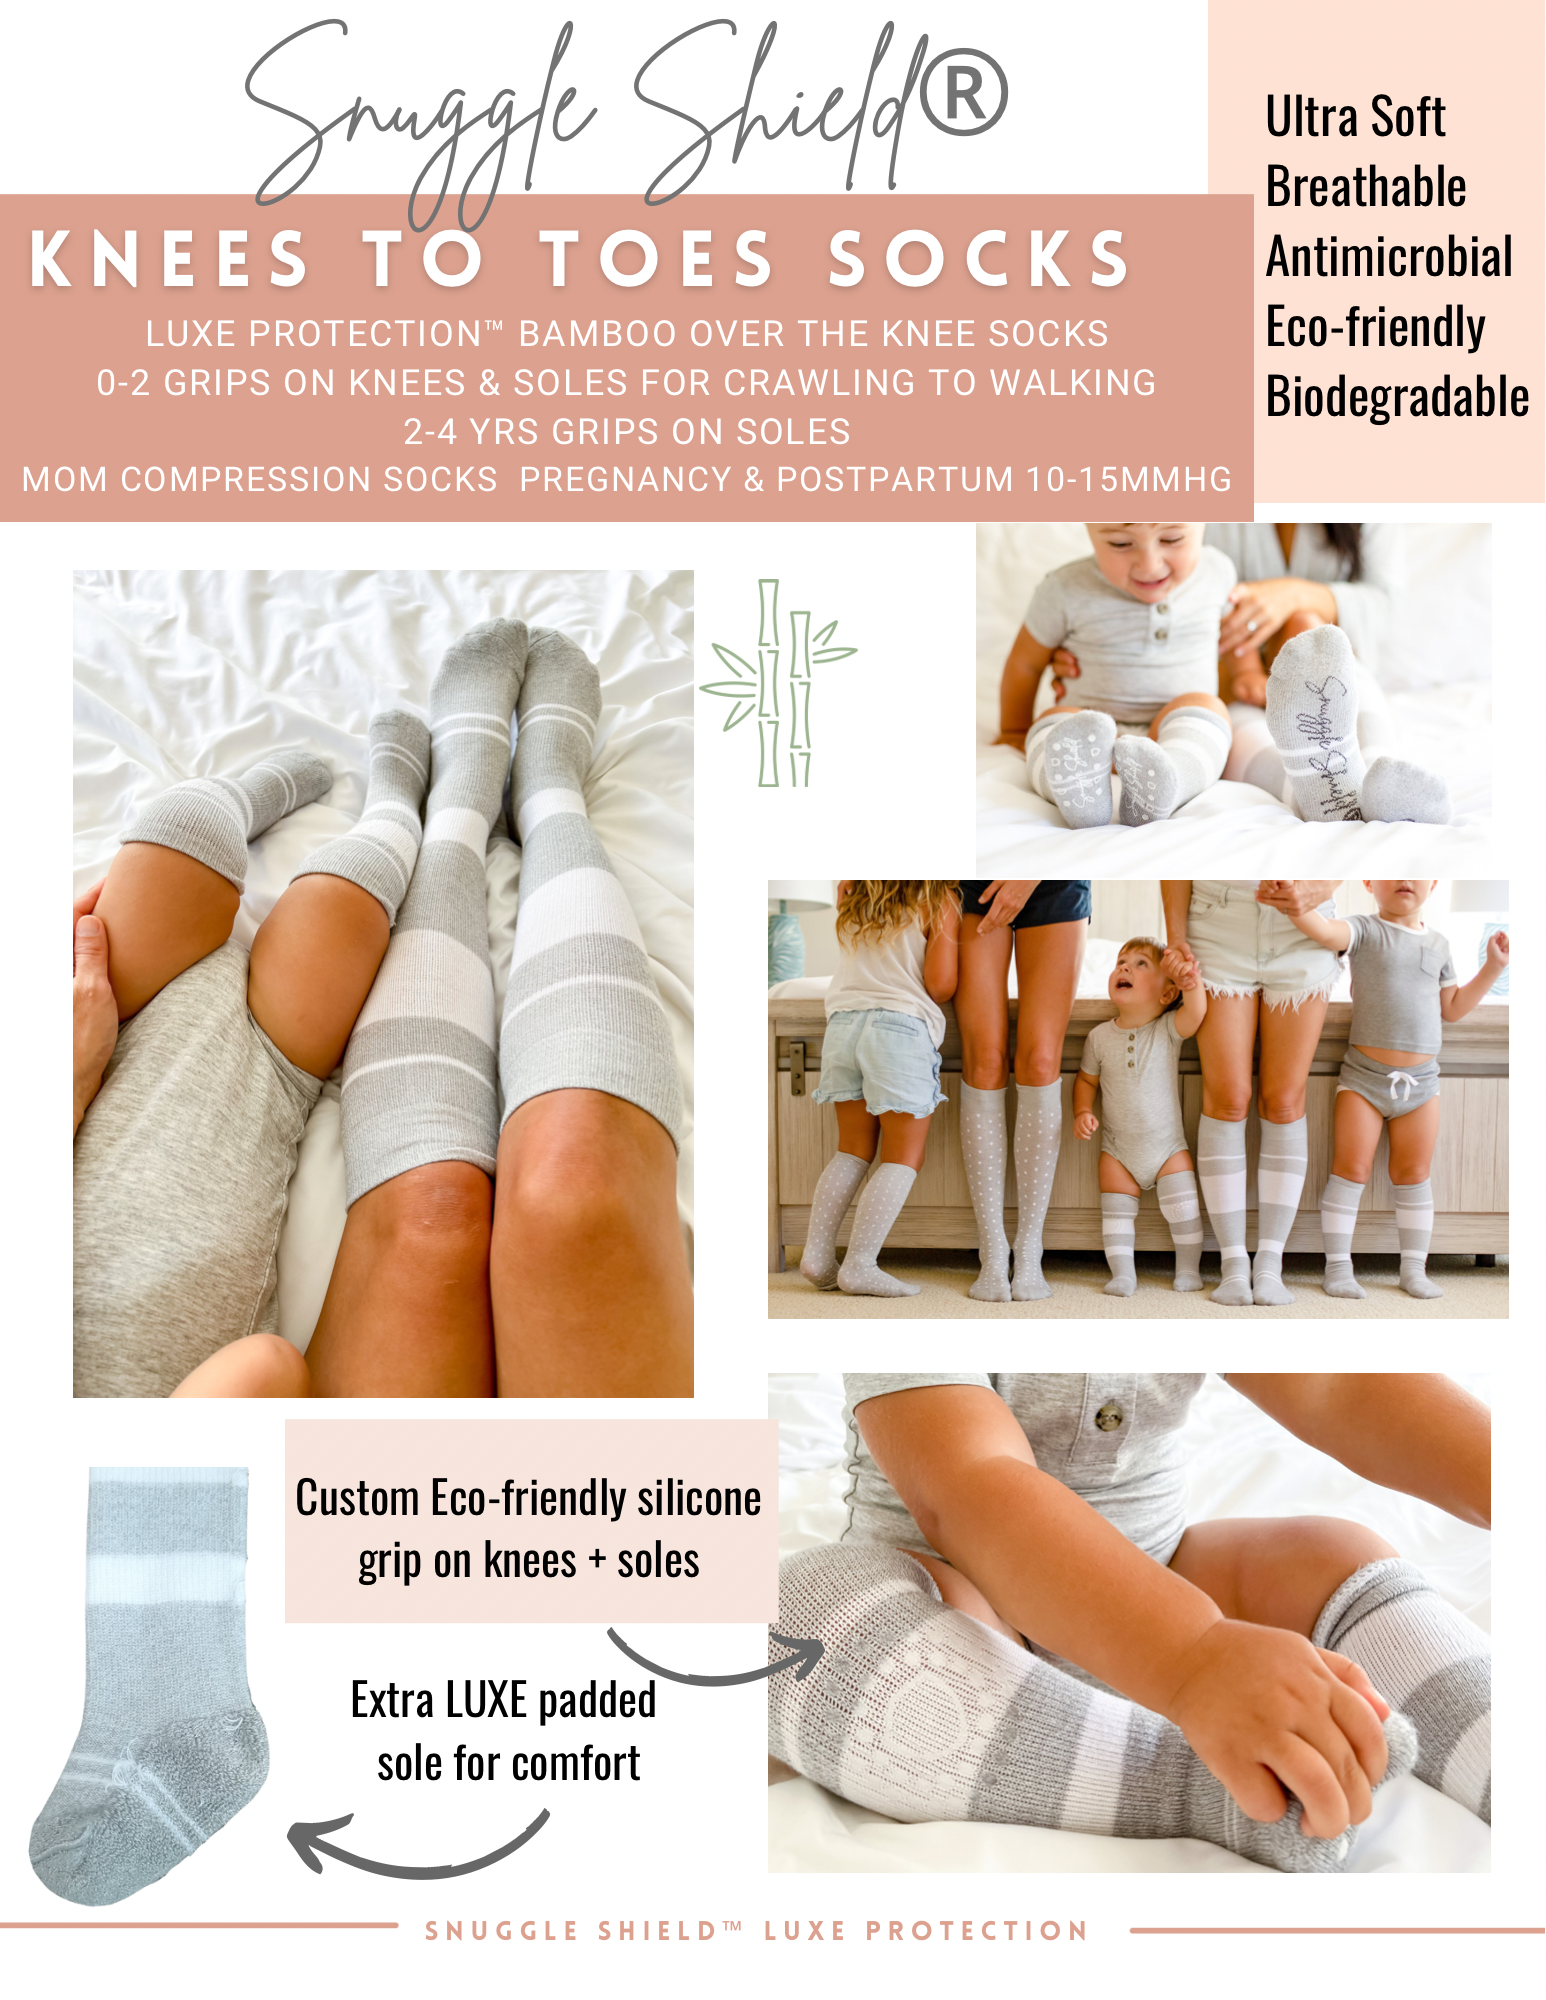 Snuggle Shield ® LUXE Protection Bamboo Knees to Toes Socks